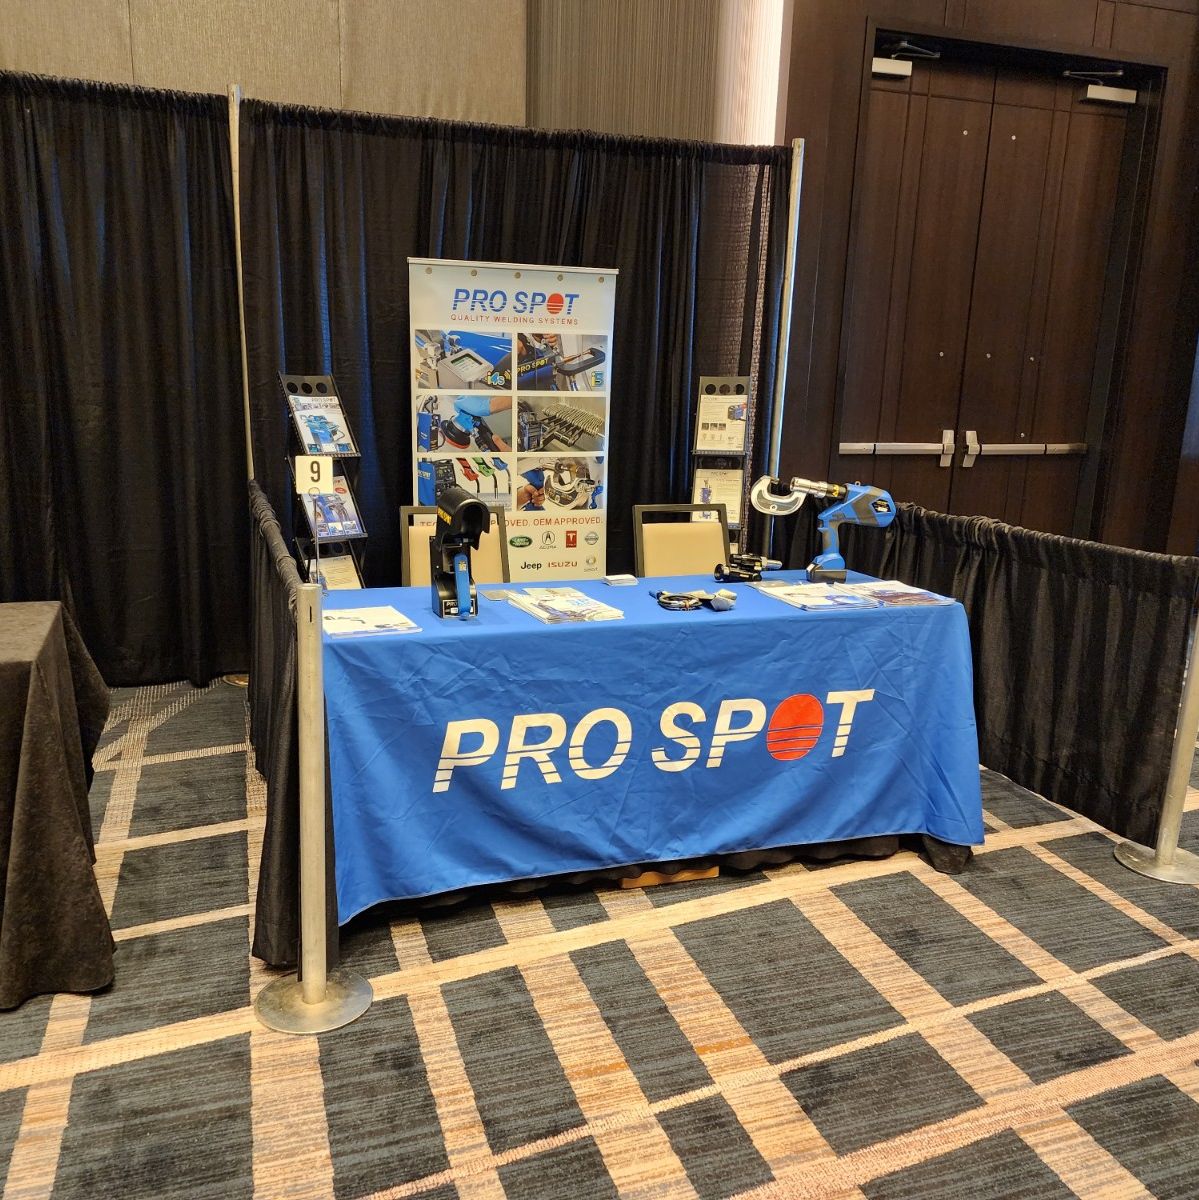 Happy Monday!
We are ready for Certified Collision Group Conference in Nashville, TN.

#conference #collision #collisionequipment #prospot #happymonday